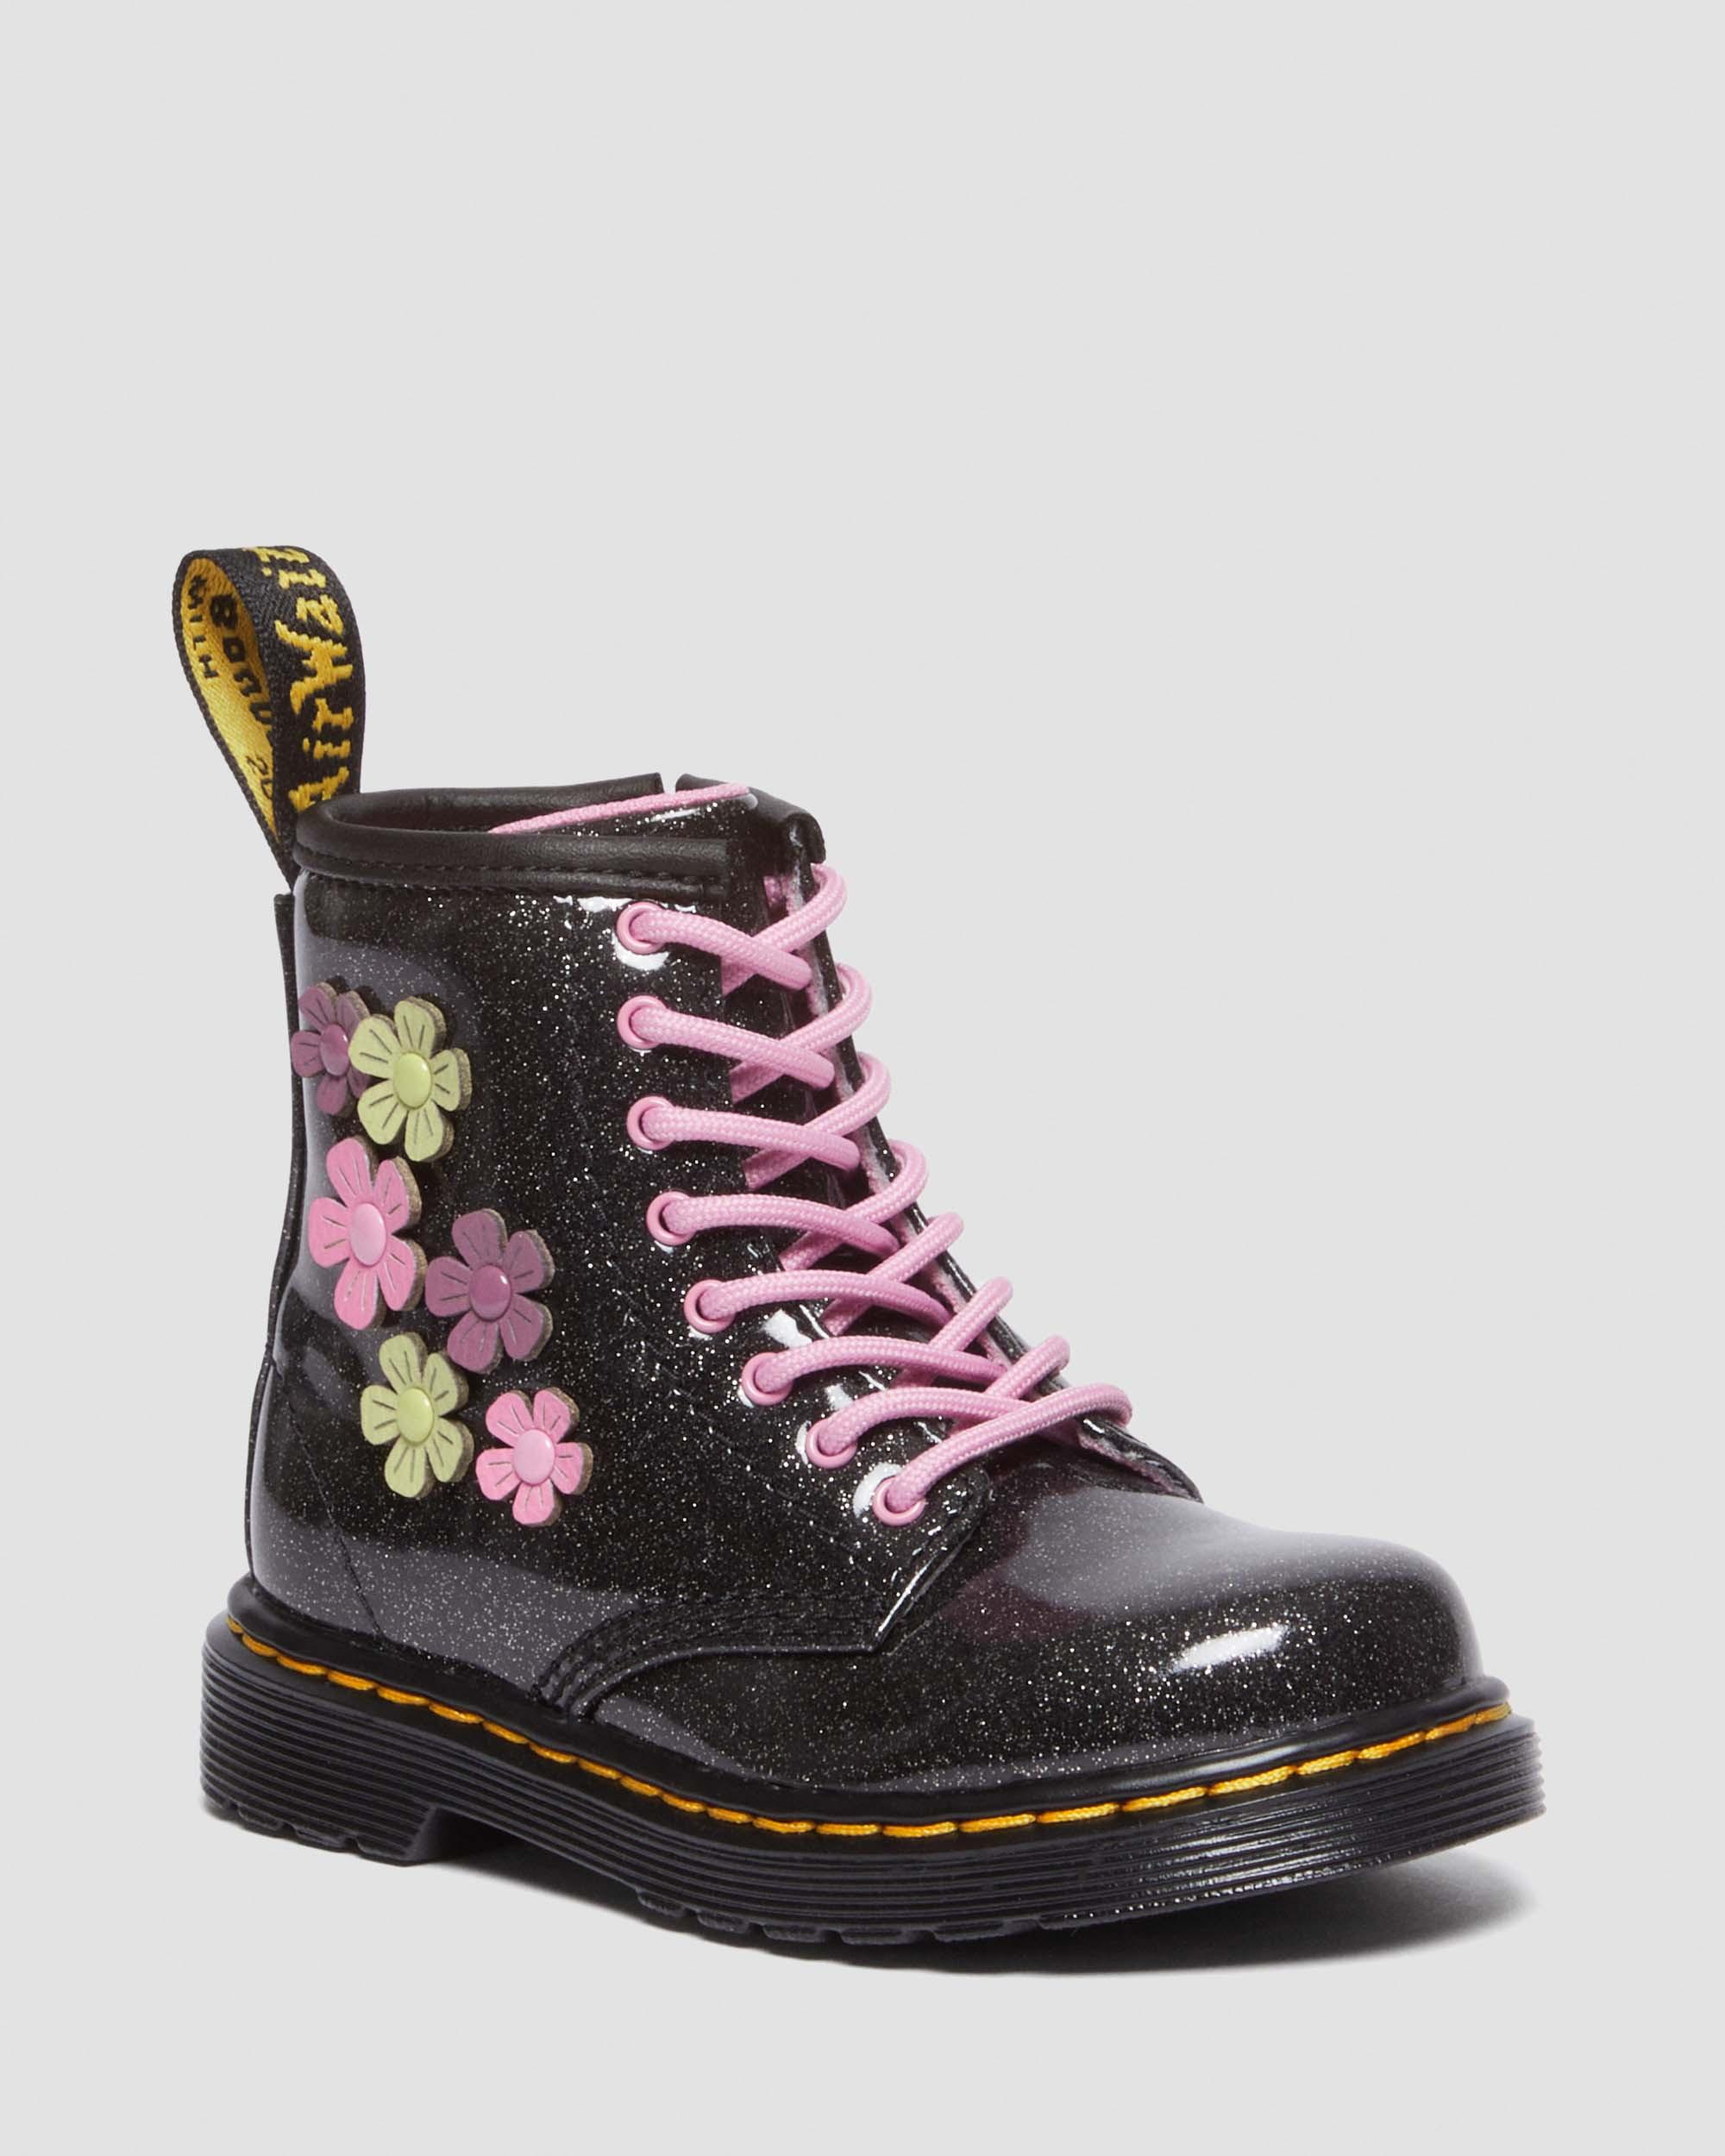 Toddler 1460 Glitter & Flower Applique Lace Up Boots in Black+Multi